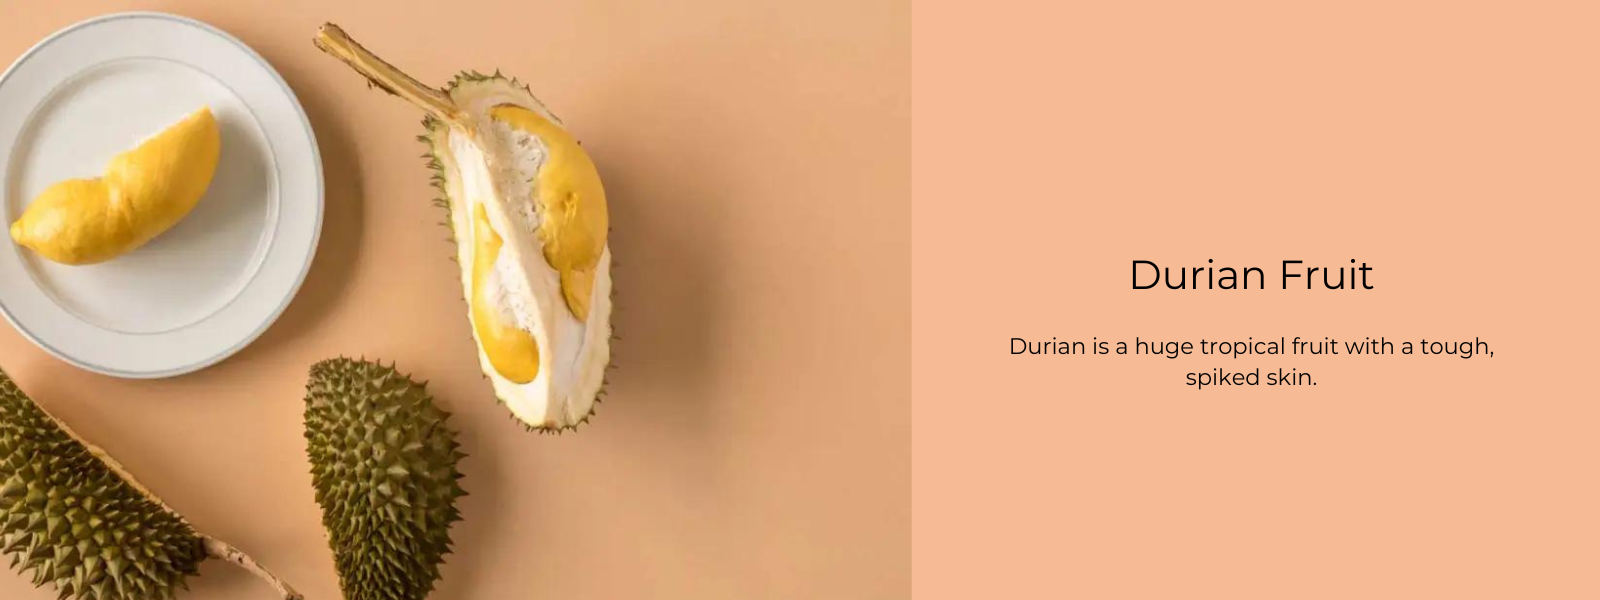 Durian Fruit – Health Benefits, Uses and Important Facts